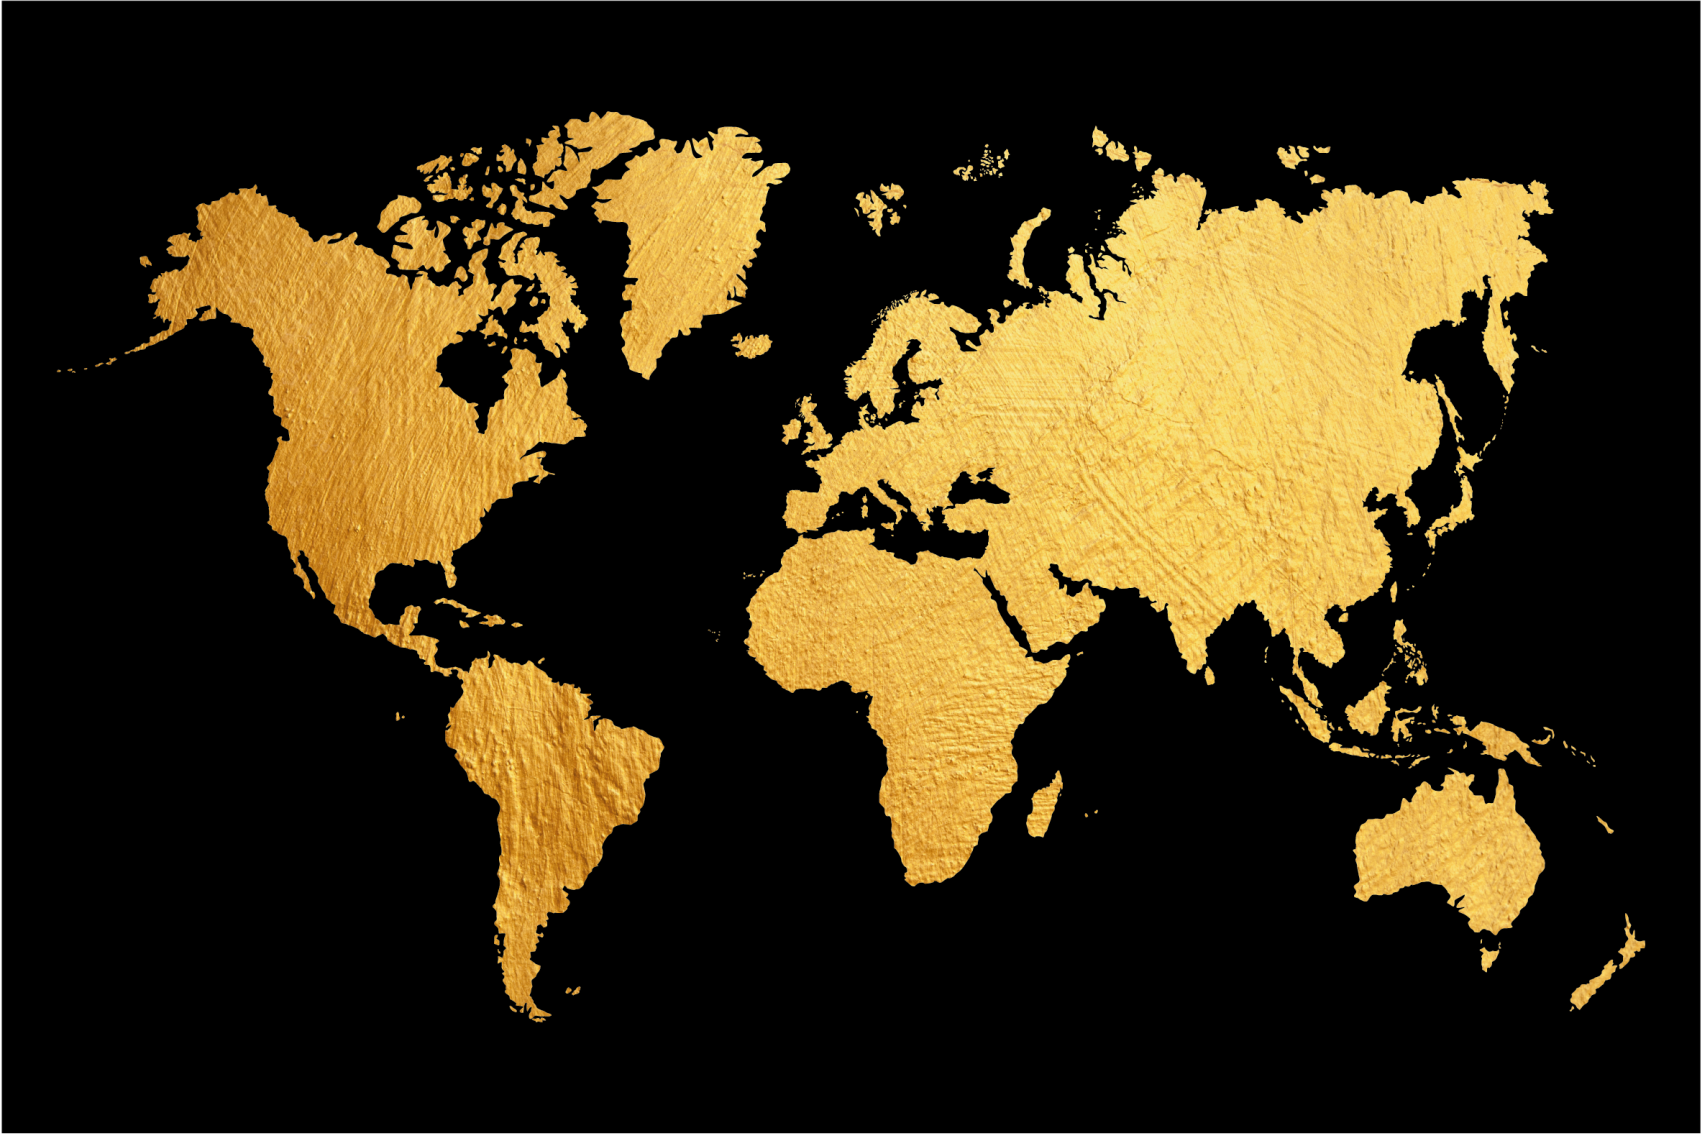 Black and Gold world map art canvas - TenStickers